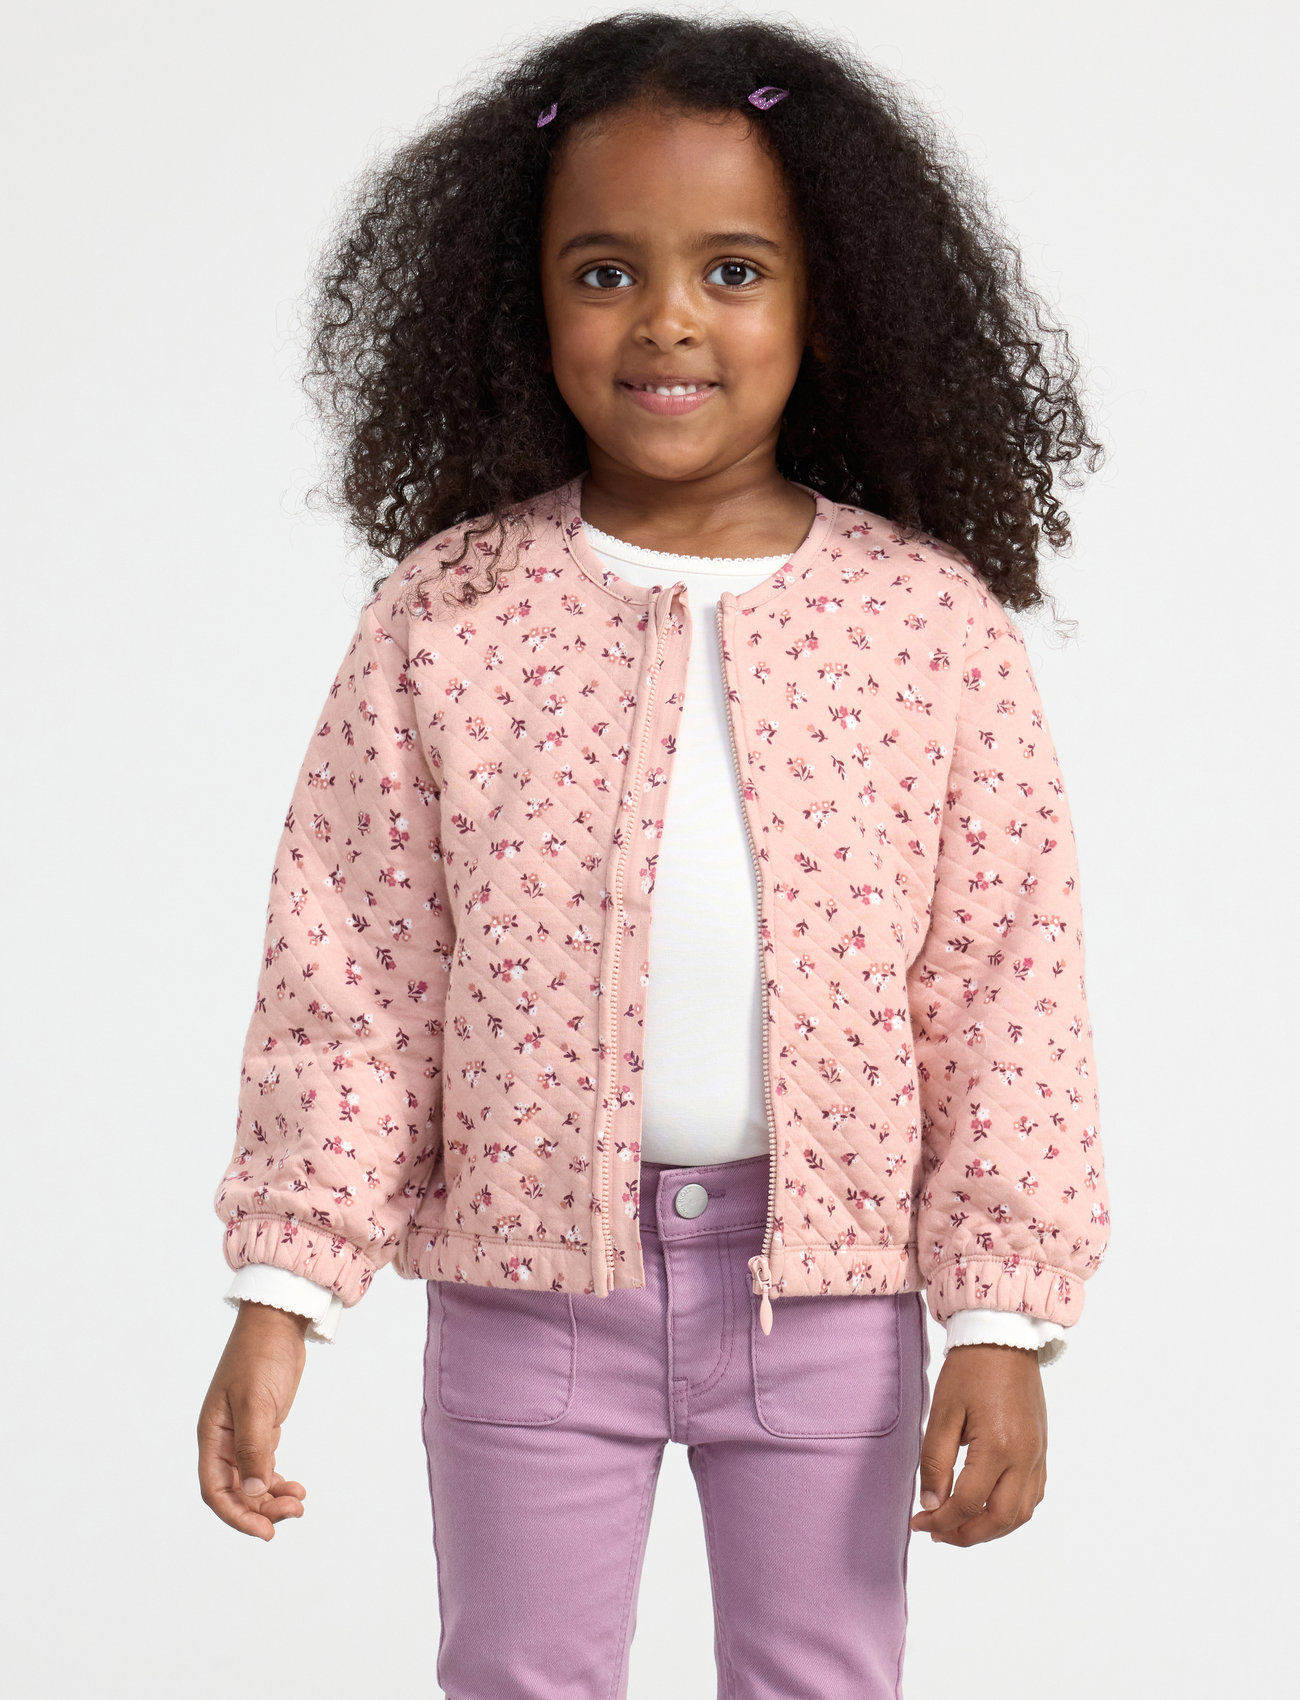 Lindex - Jacket quilted tricot AOP - lowest prices - dusty pink - 1